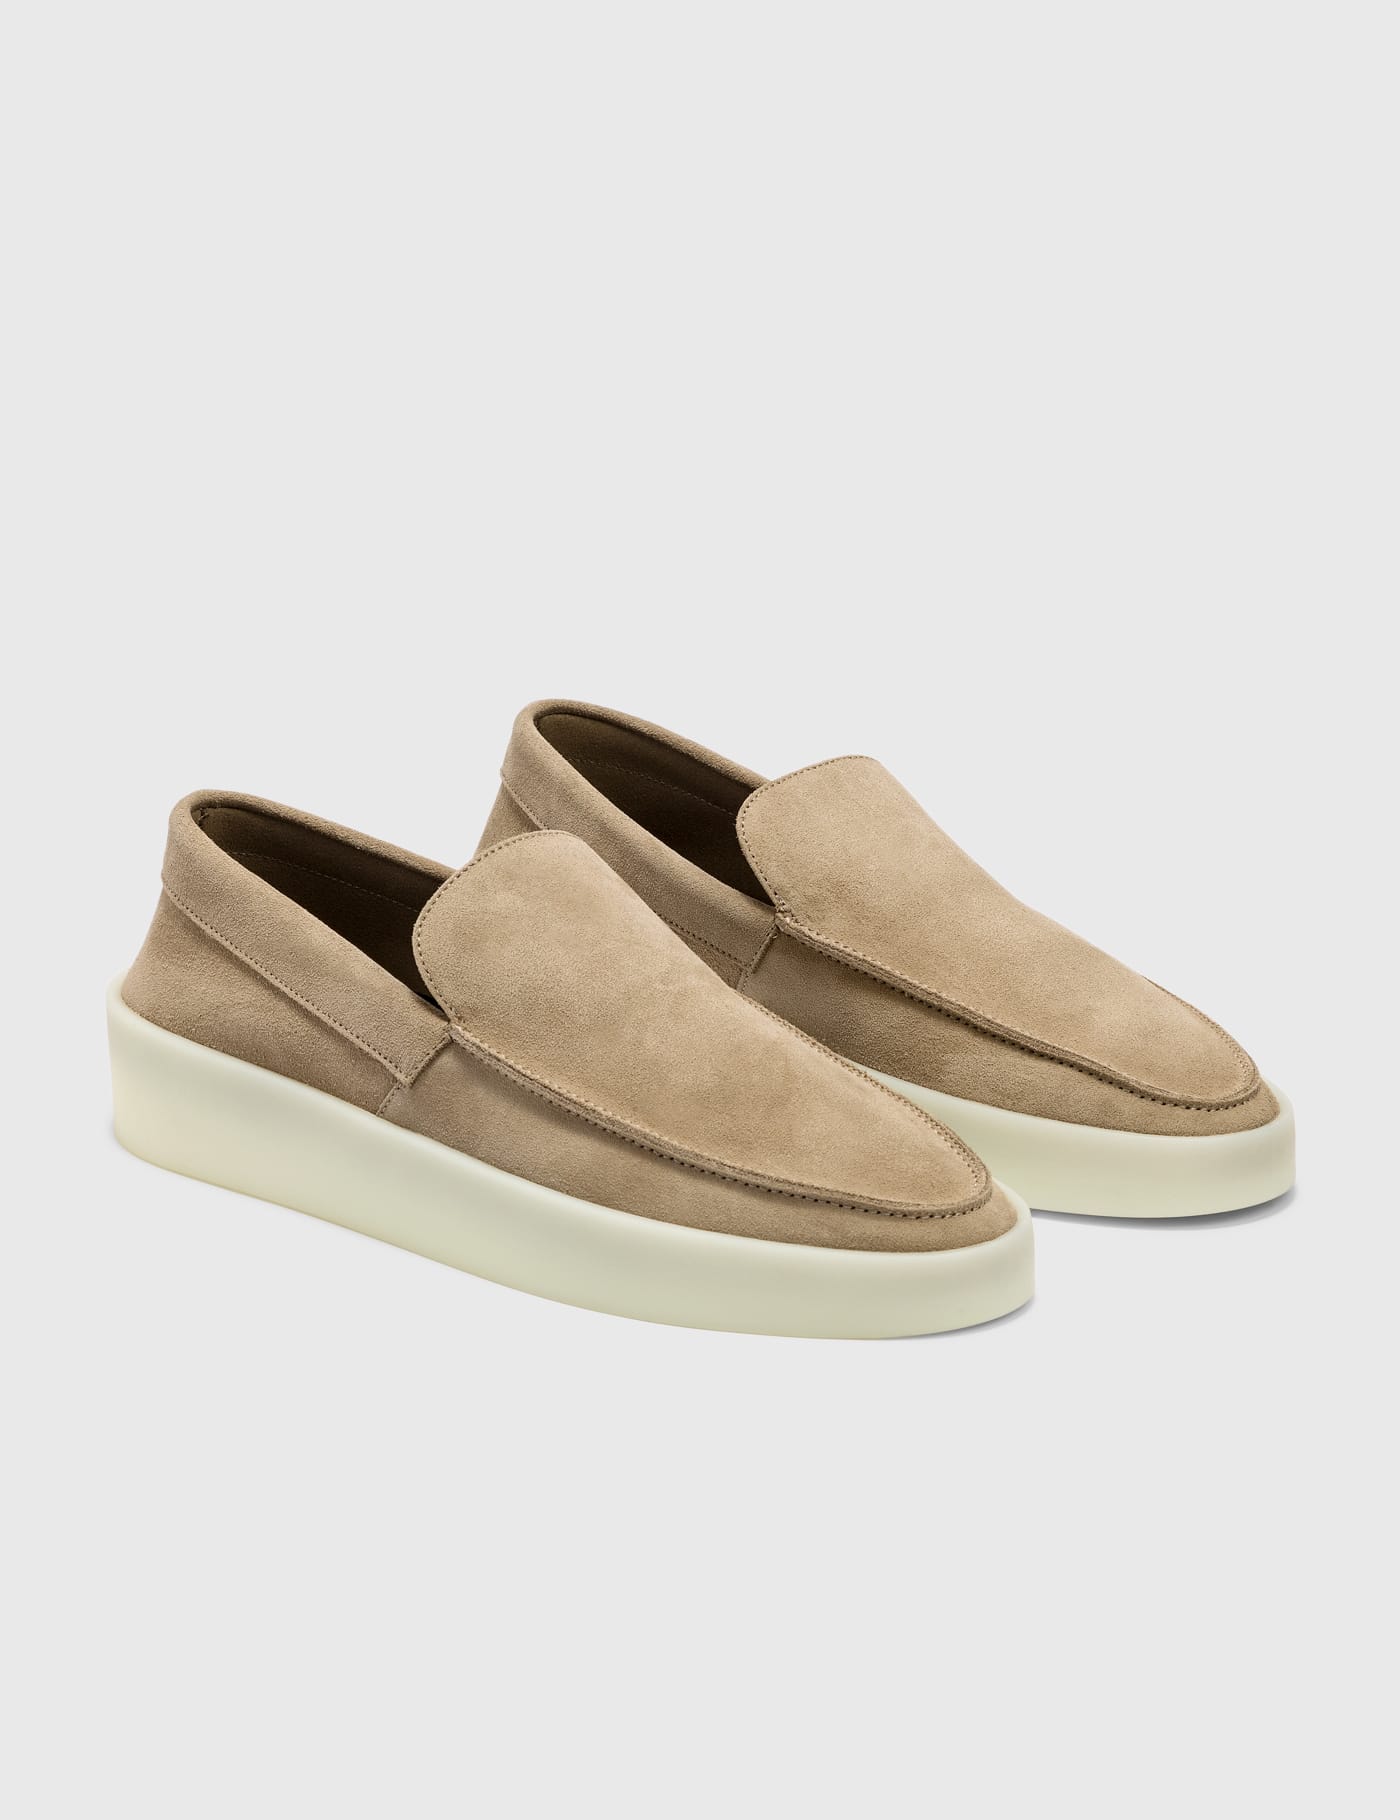 Fear of God - The Loafer | HBX - Globally Curated Fashion and 